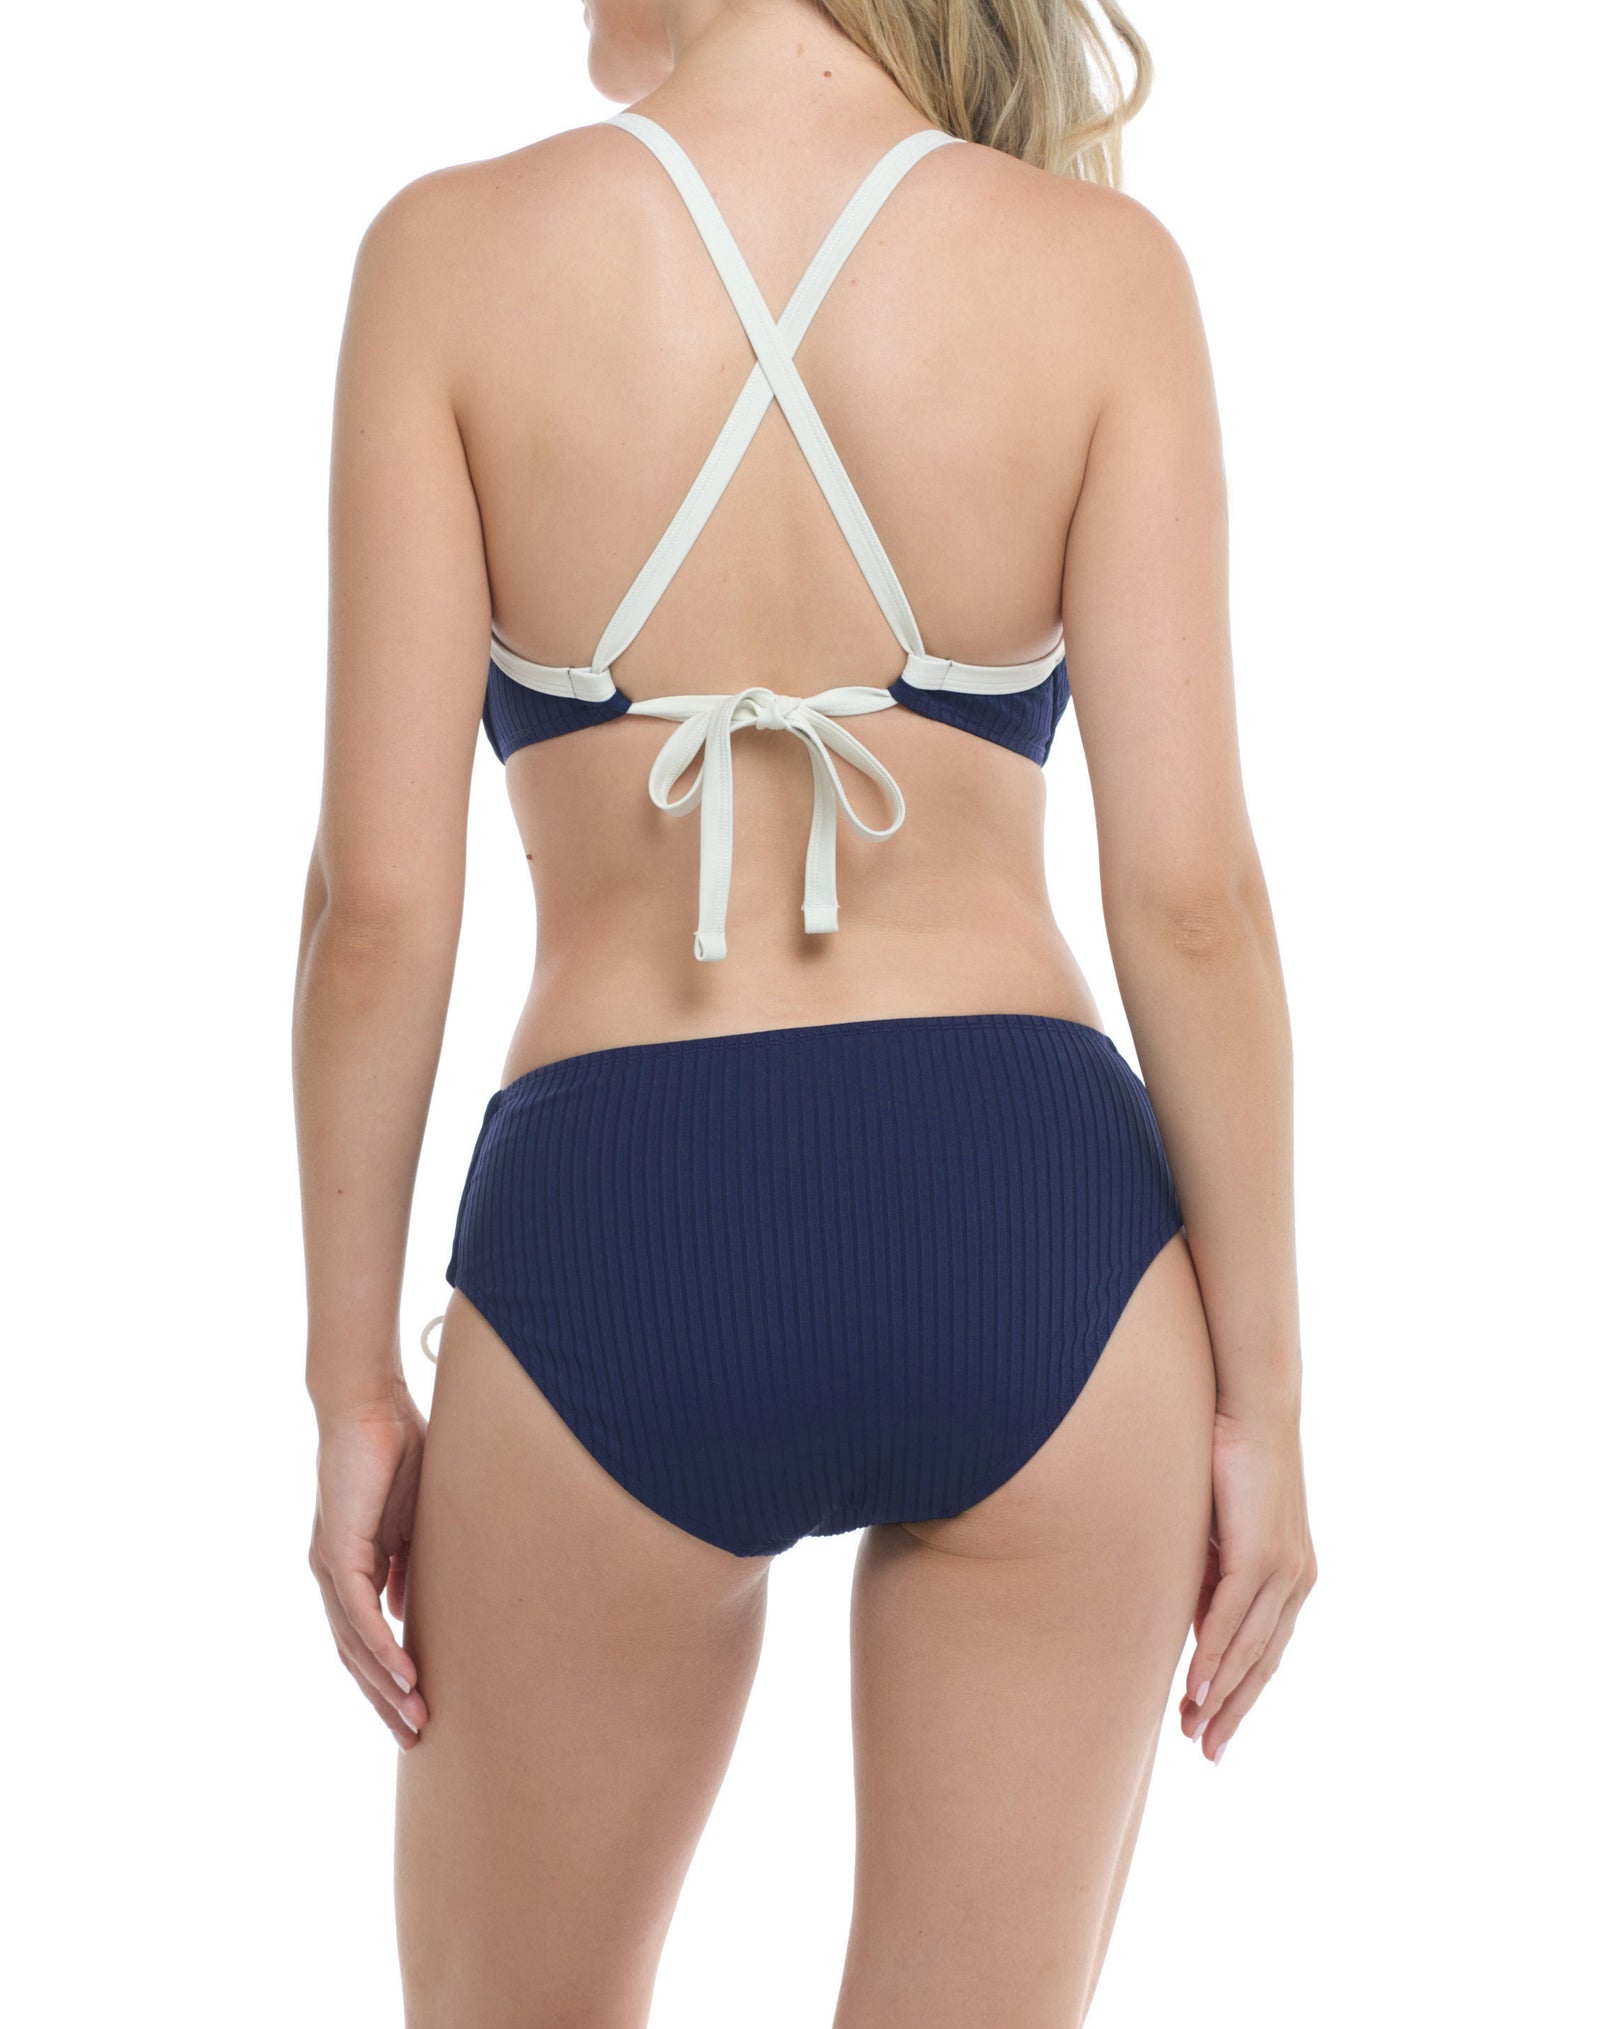 MAU LOA COLLECTION: HILARY D,DD CUP  Underwire Top  Removable Soft Cups, Ribbed Fabric, Power Mesh, Wider Straps, 2-Way Tie Back   Product#: SK73615D